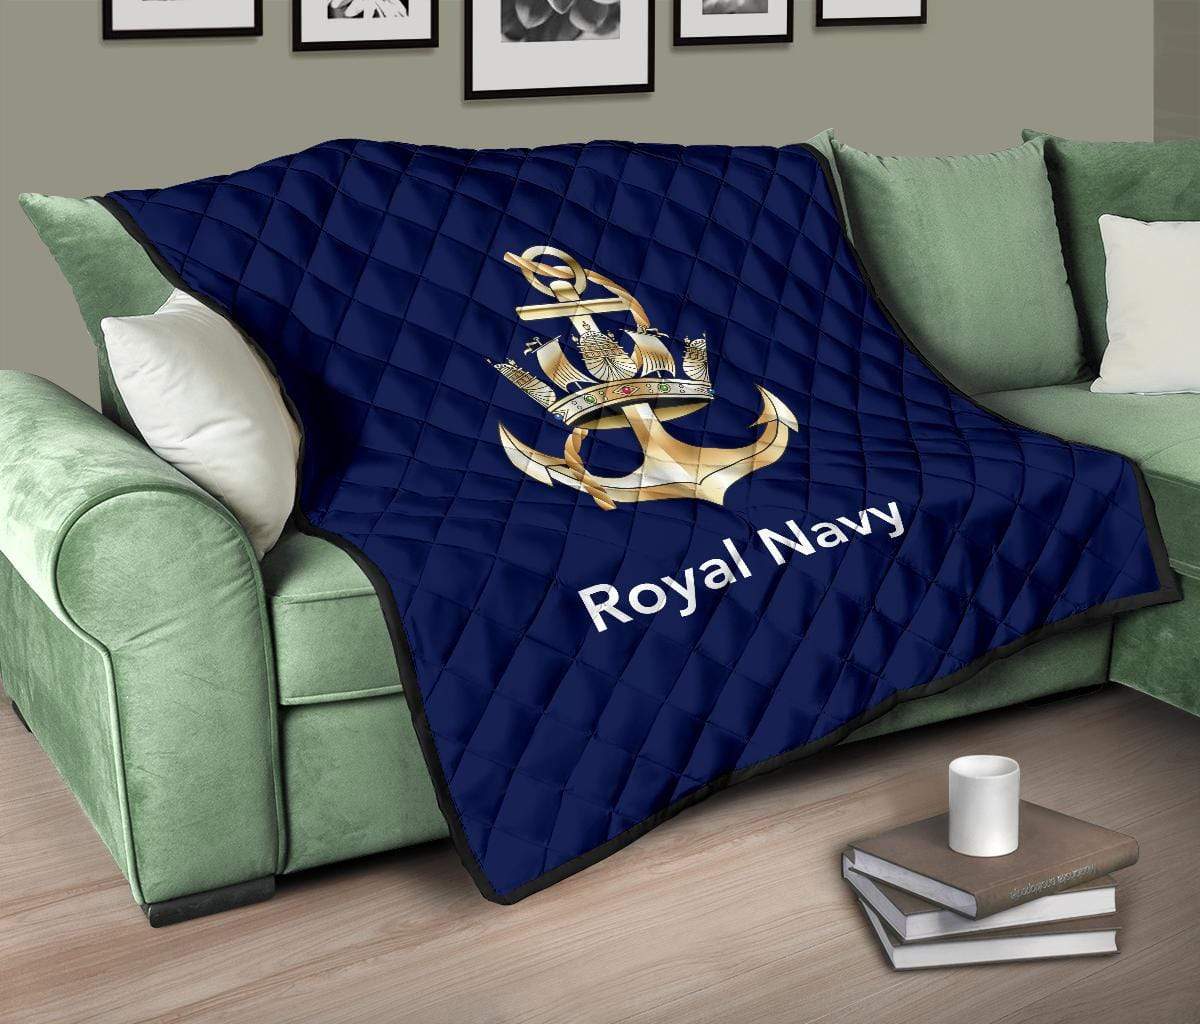 quilt Queen (80 x 90 inches / 203 x 228 cm) Royal Navy Quilted Blanket